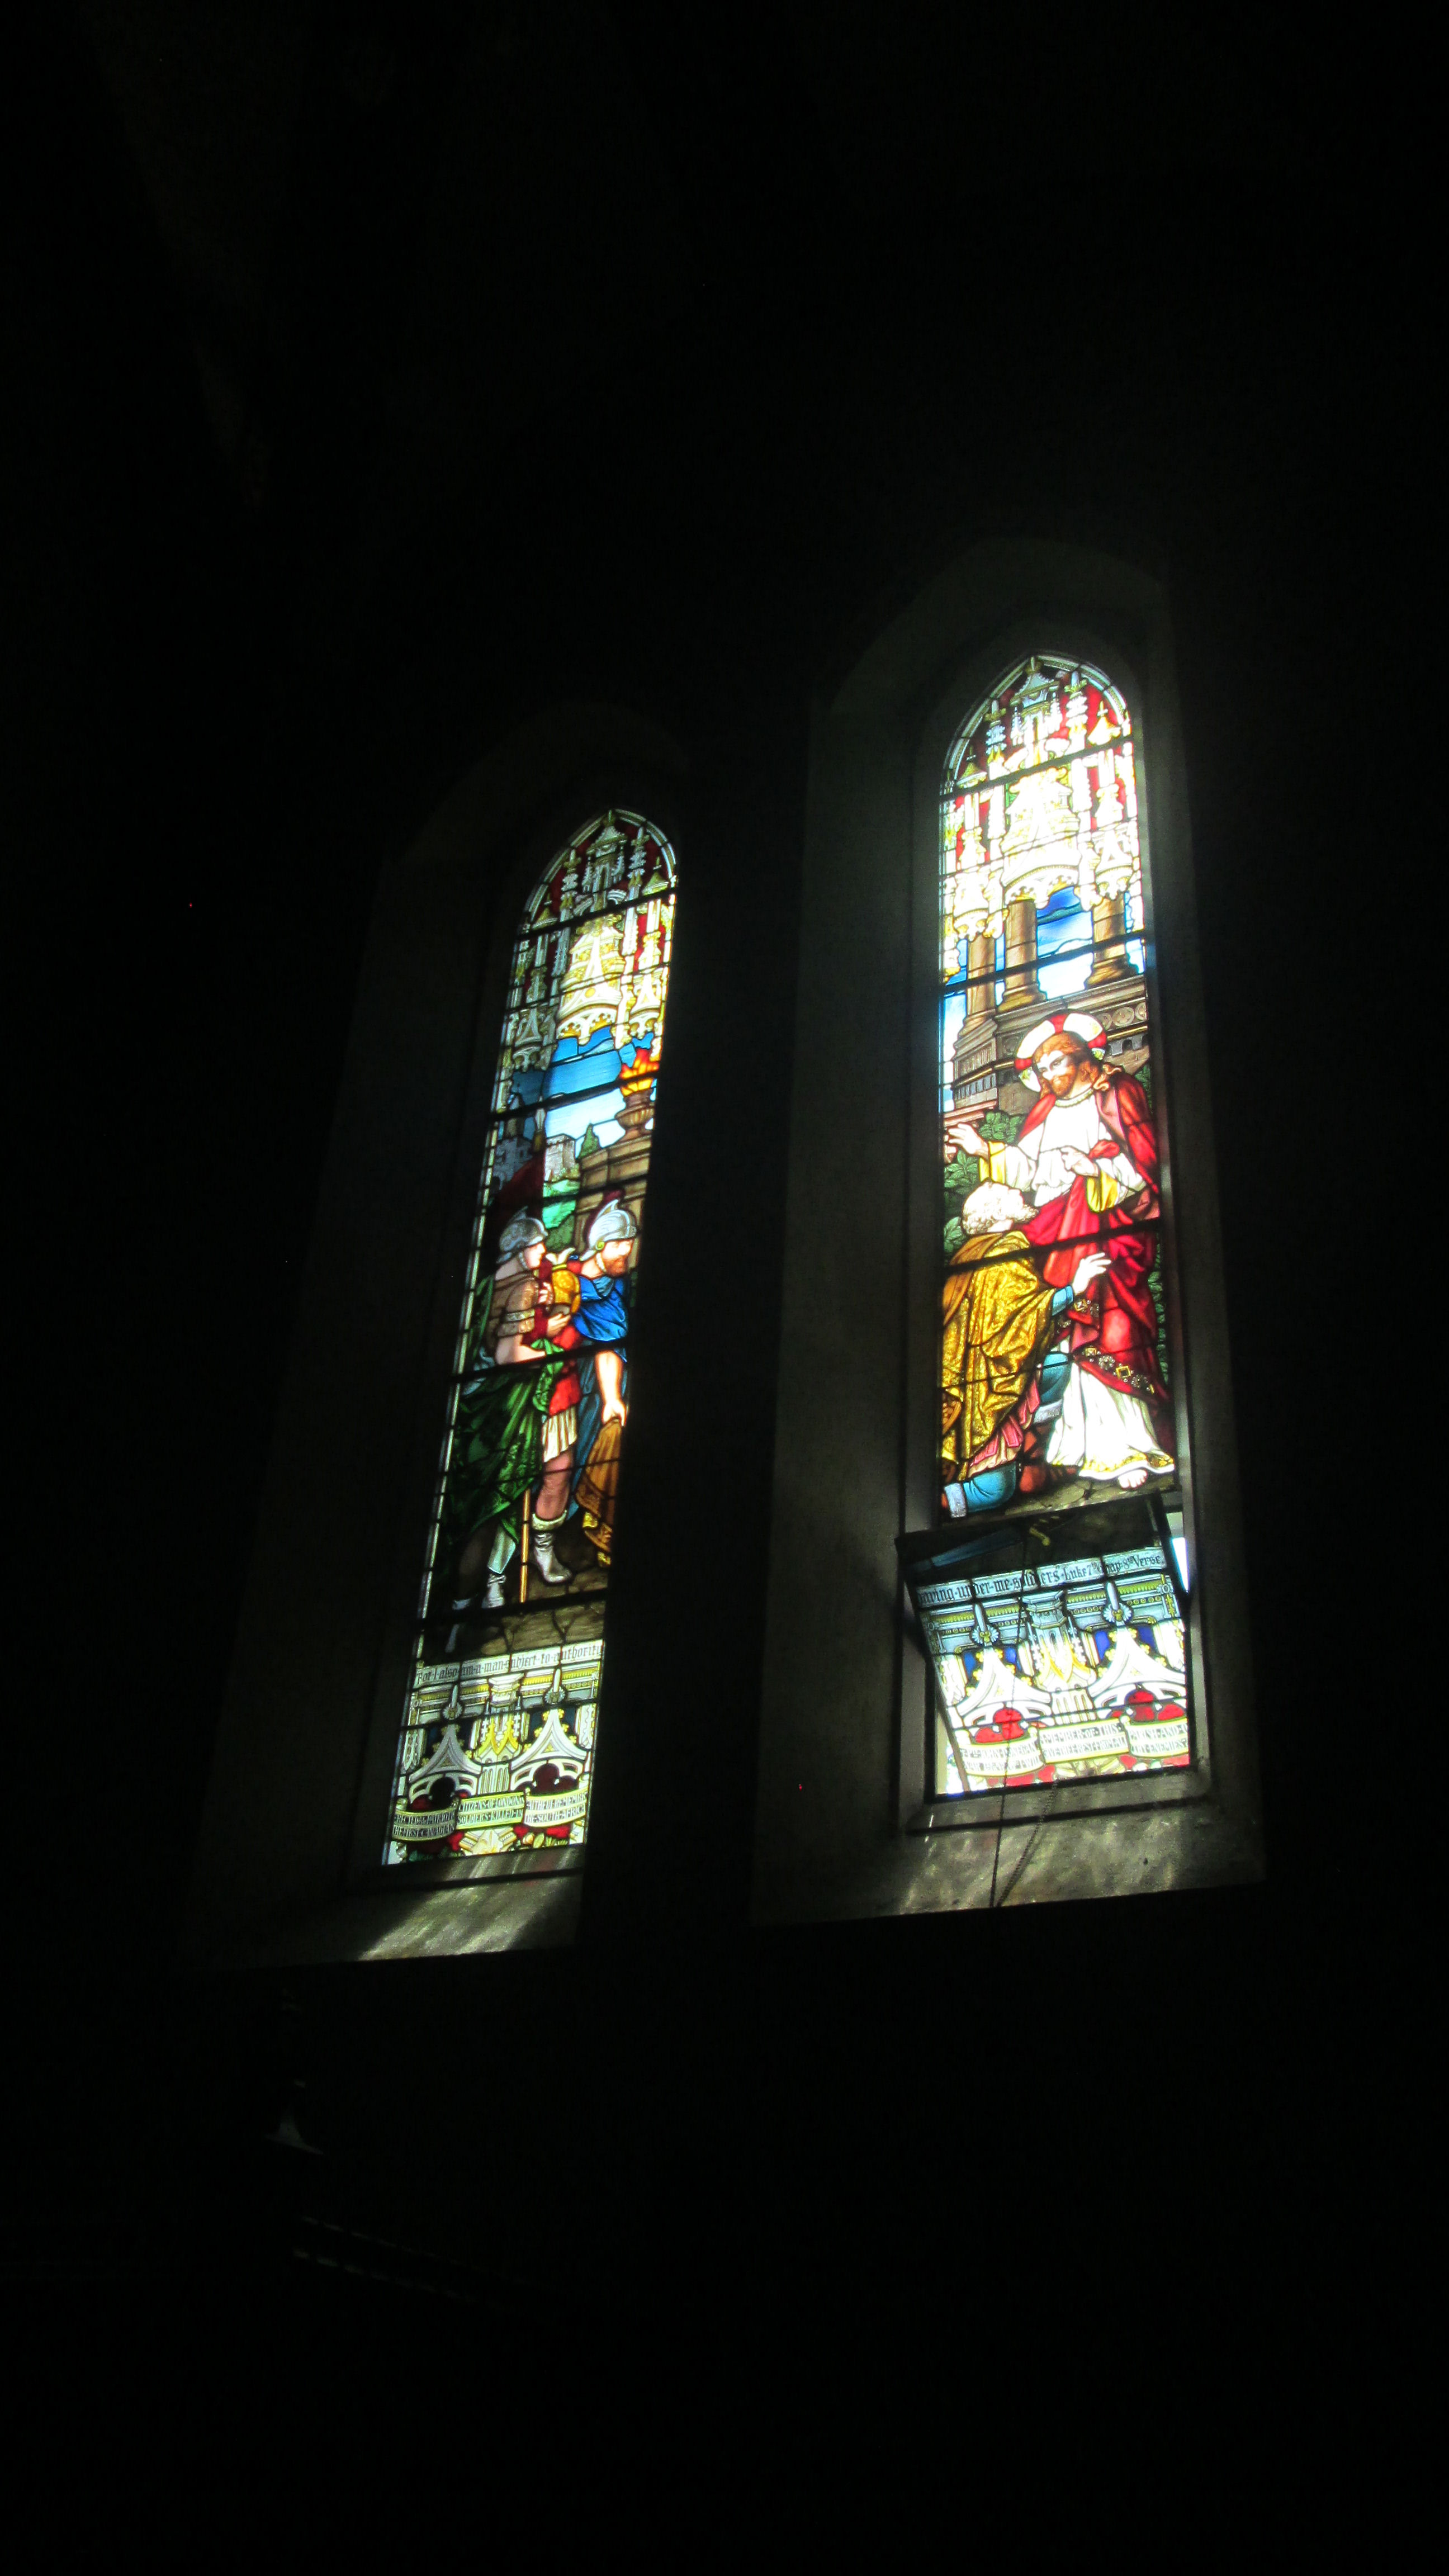 Photo 1- Pte Donegan stained glass window (photo by R. Turcotte)